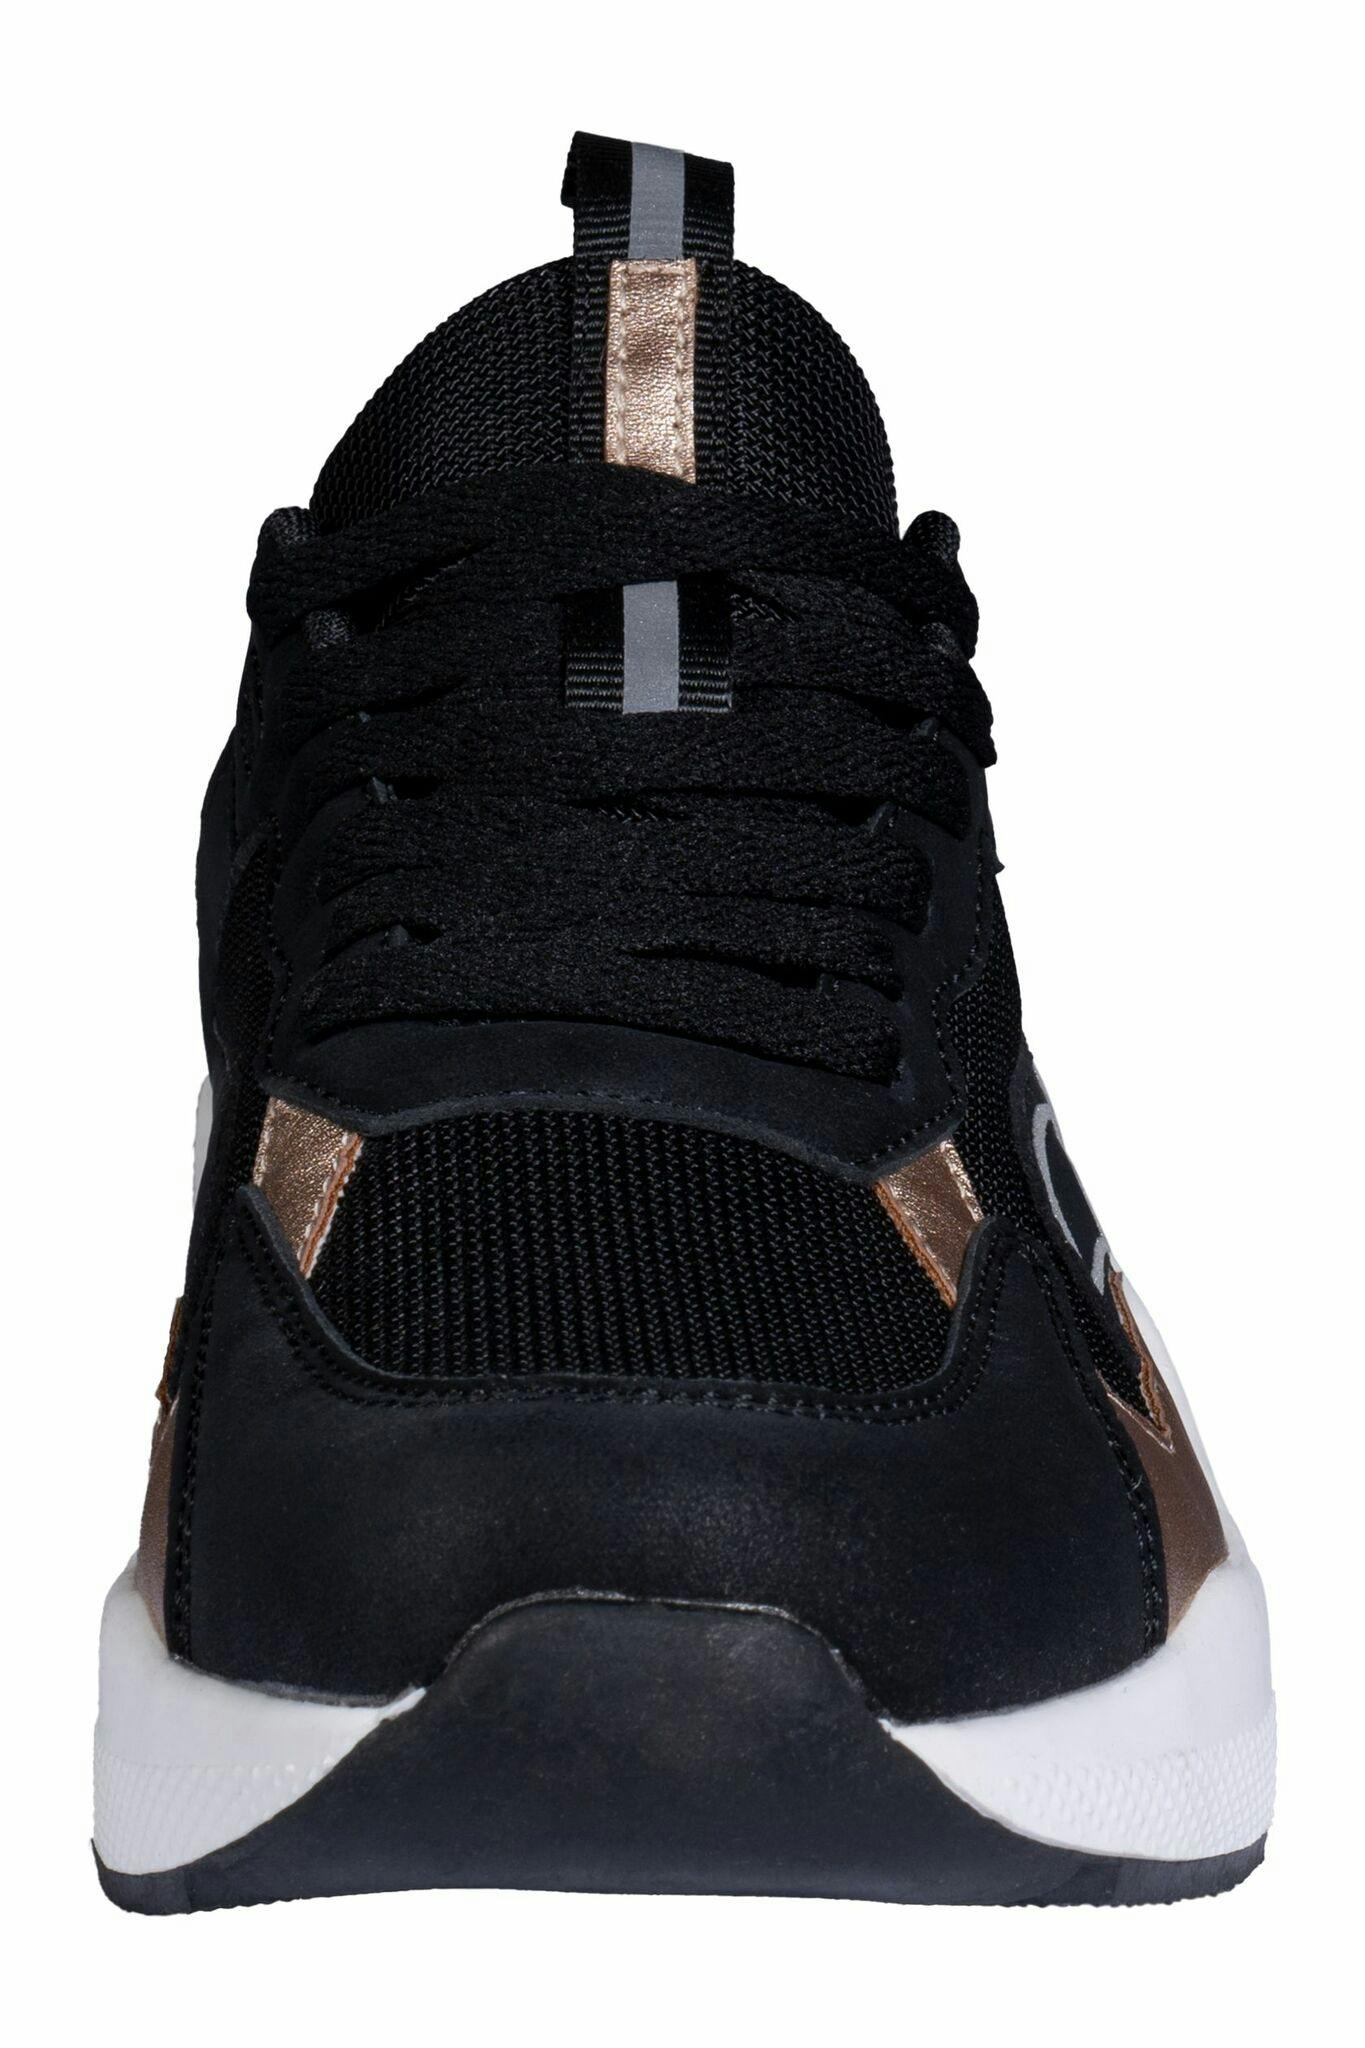 Sneakers, 36-42, HKM Rosegold Glamour